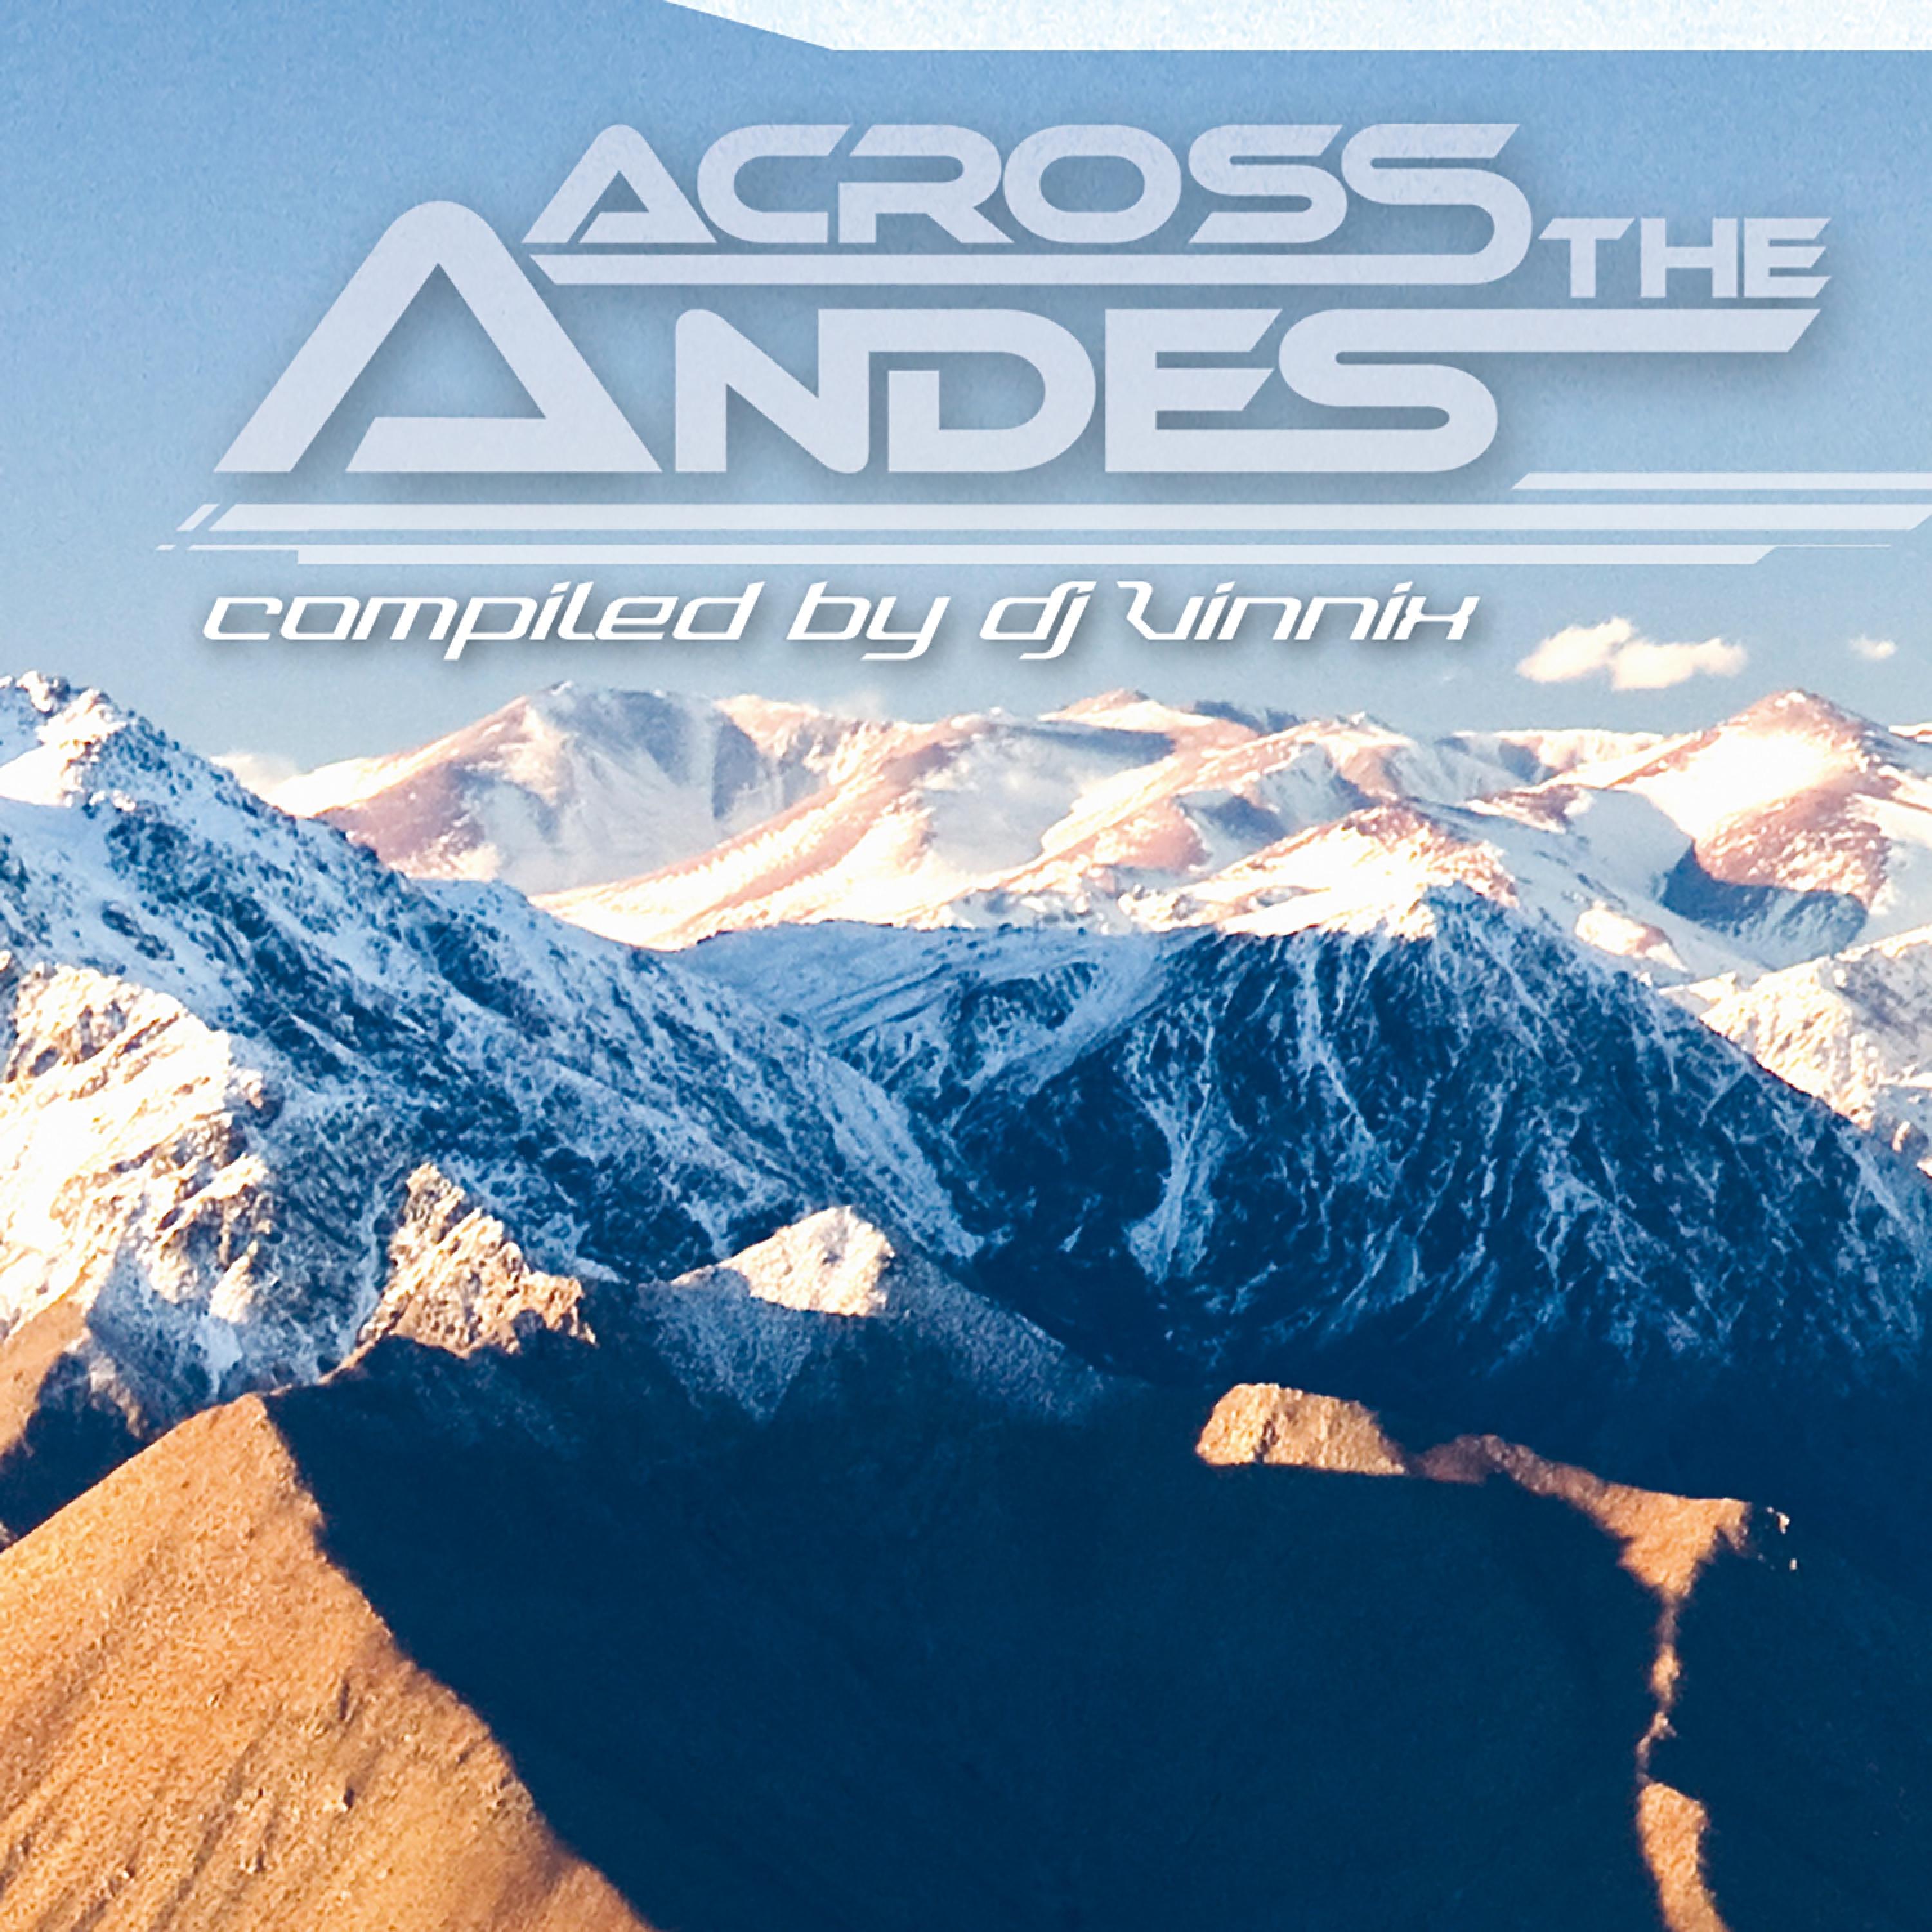 Across the Andes - Compiled by Dj Vinnix